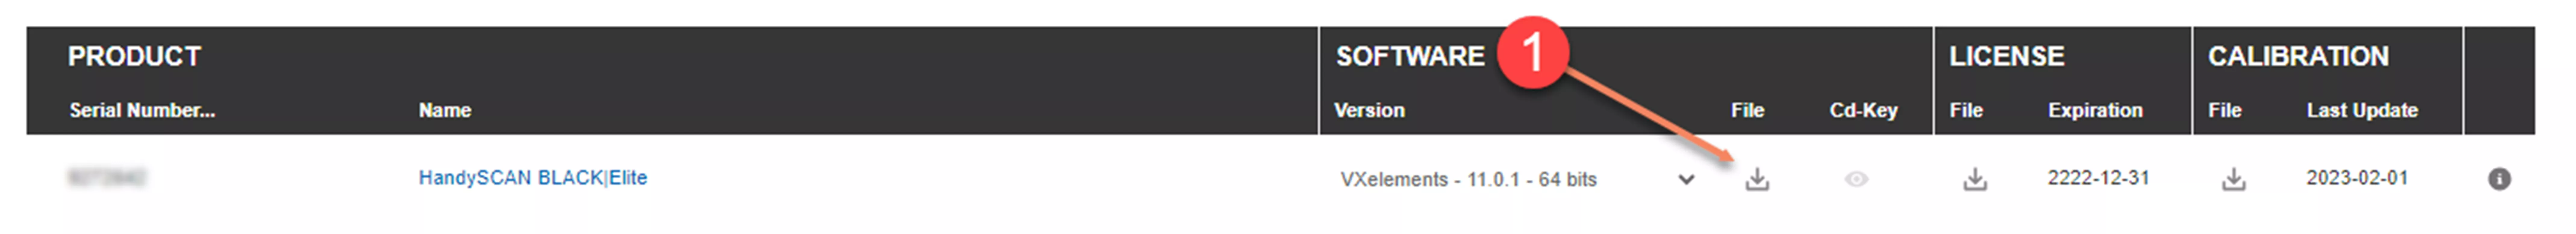 Download and Install VXelements Software